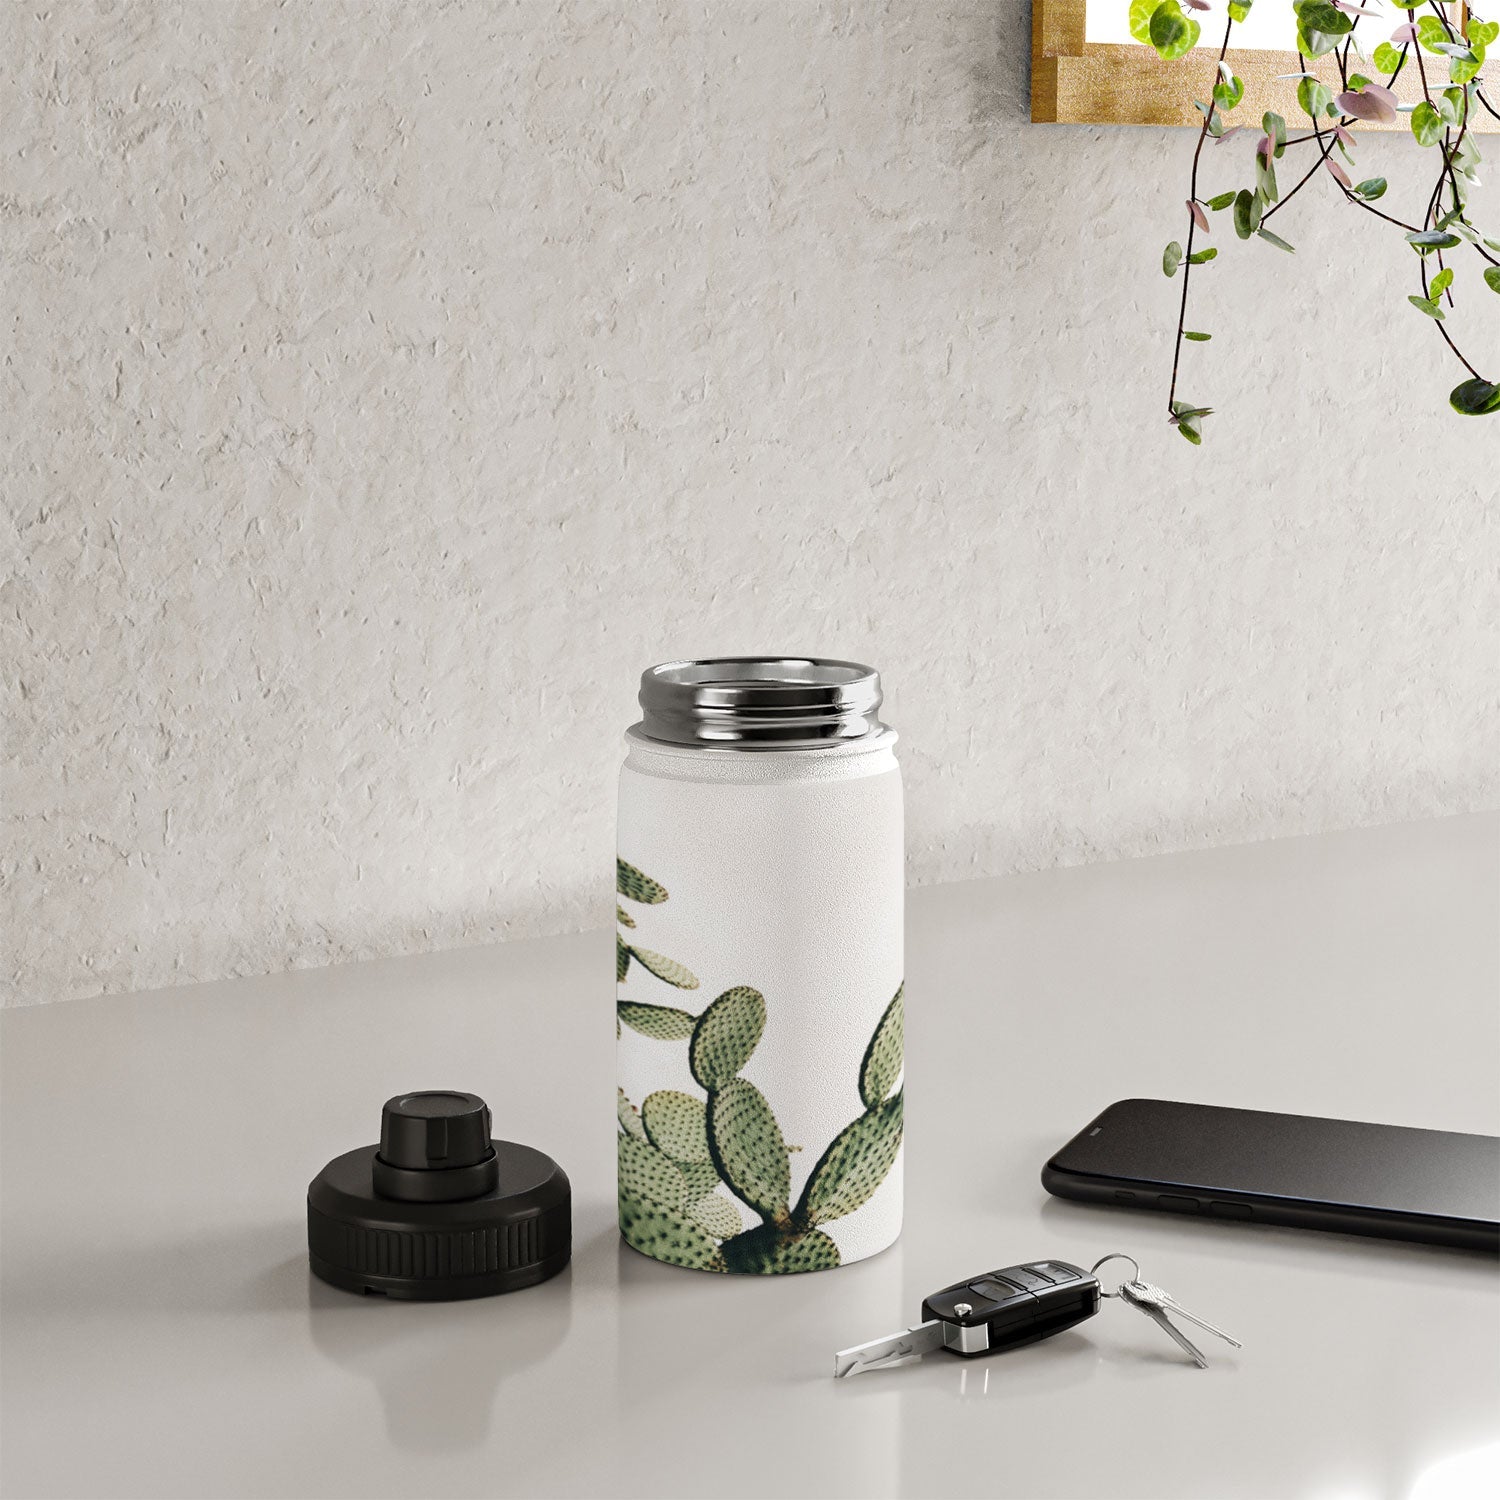 Steel Sipper Bottles: The Popular Choice for a Sustainable Lifestyle